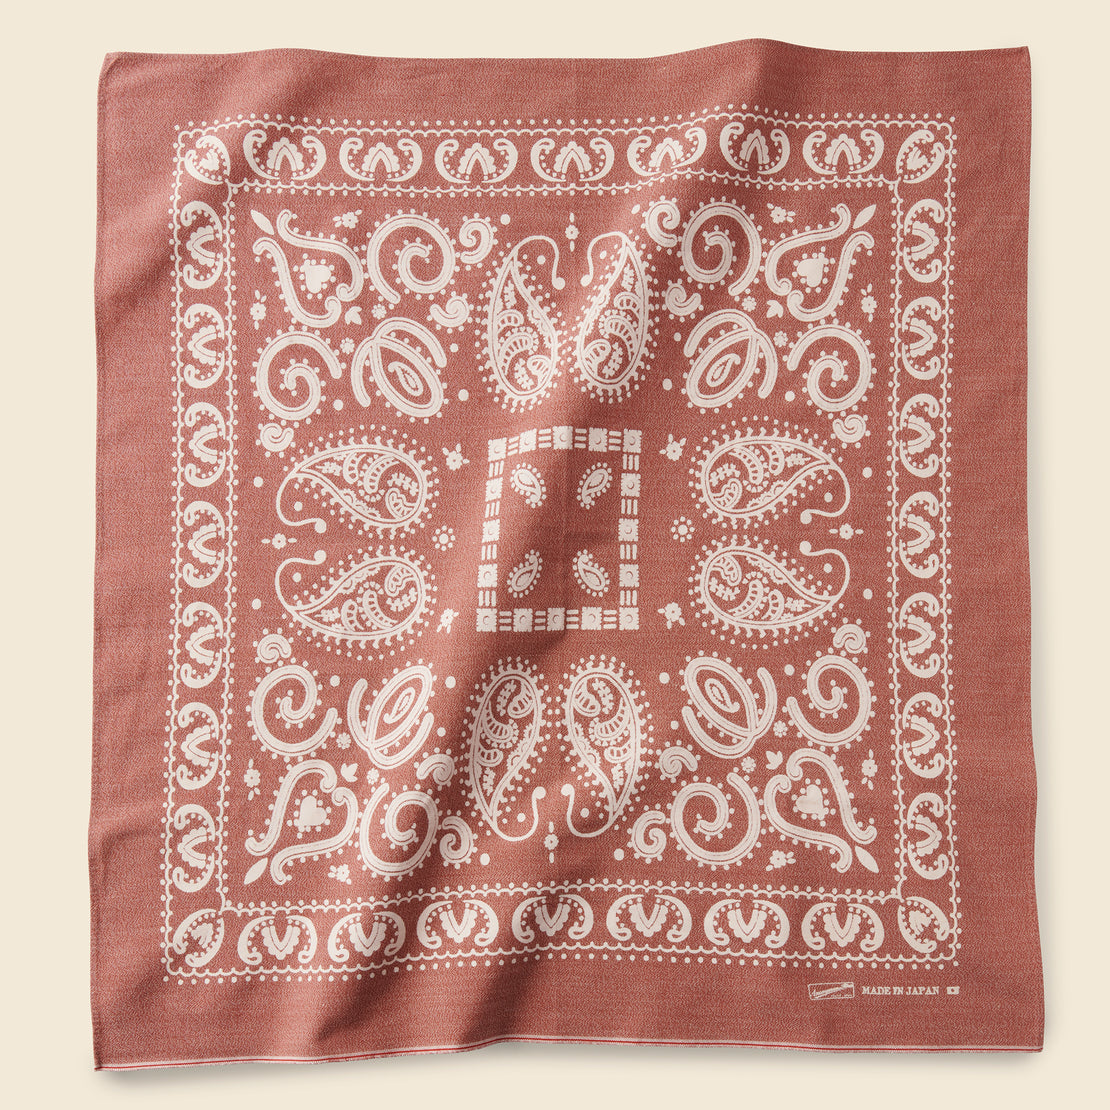 Anonymous Ism Vintage Selvedge Cloth Bandana - Red